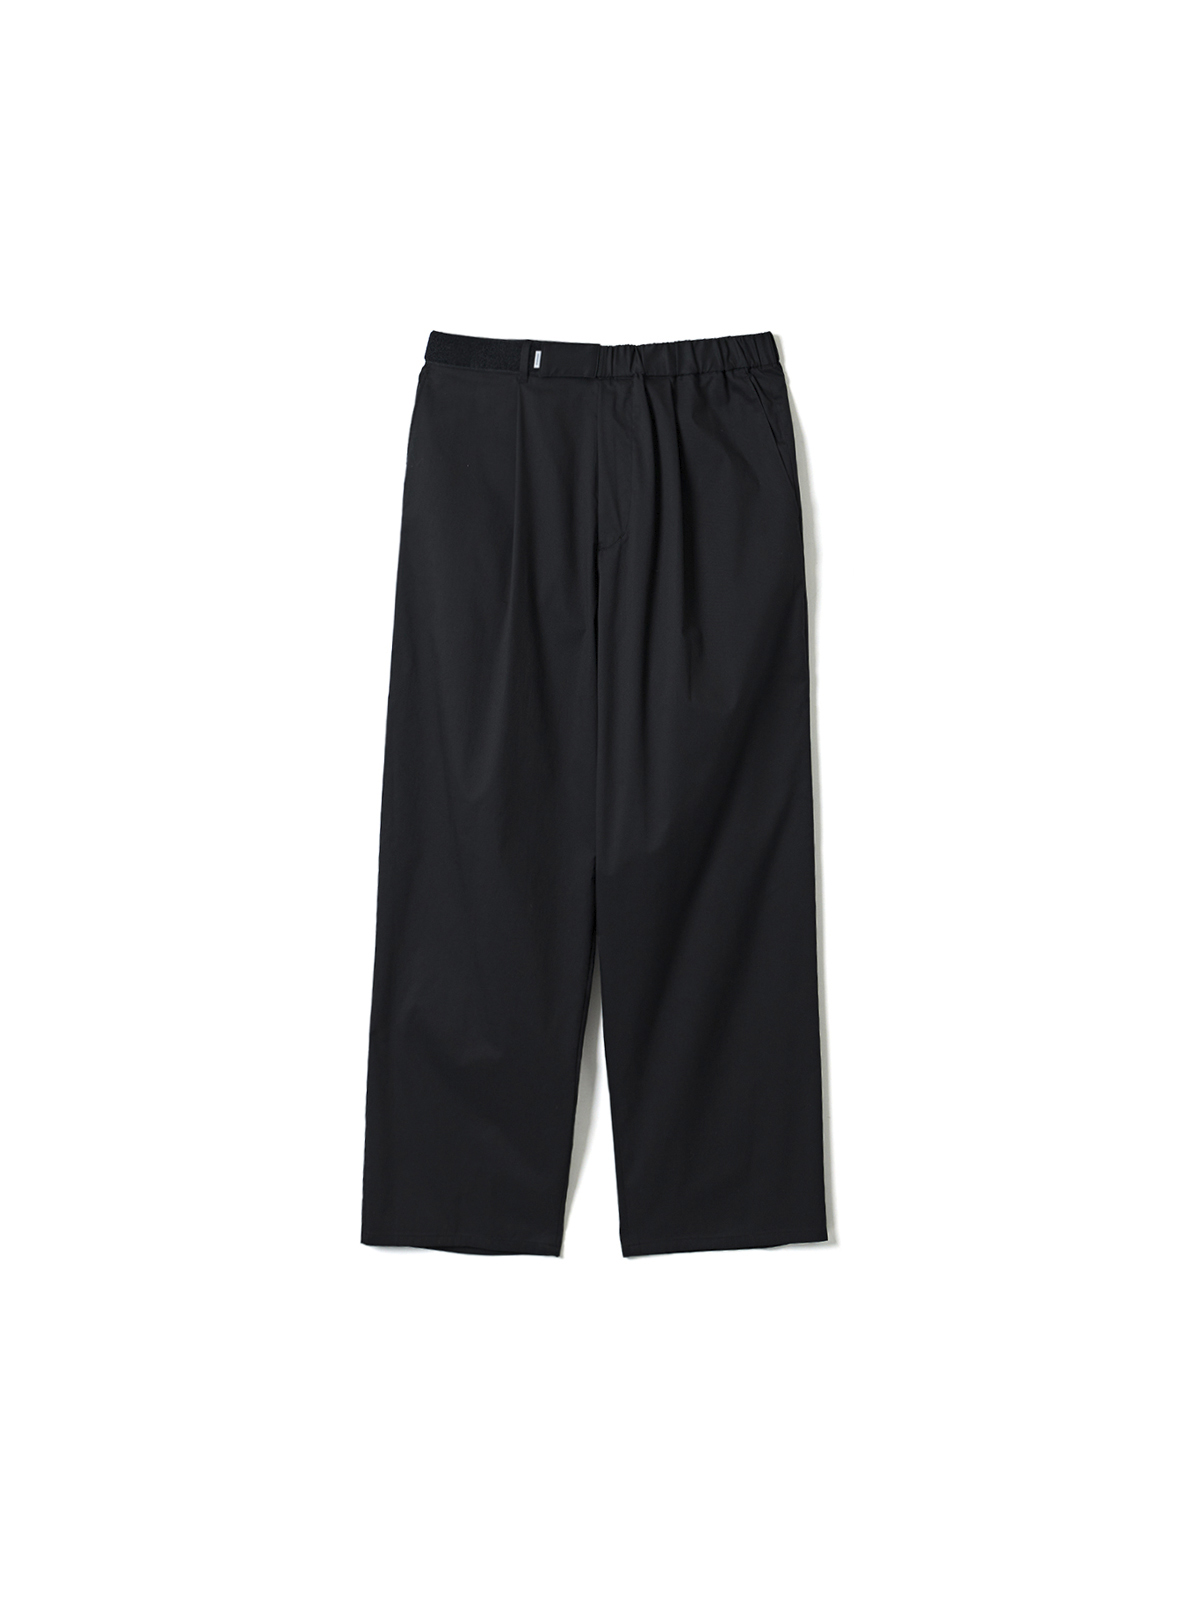 SOLOTEX TWILL WIDE CHEF PANTS (BLACK)